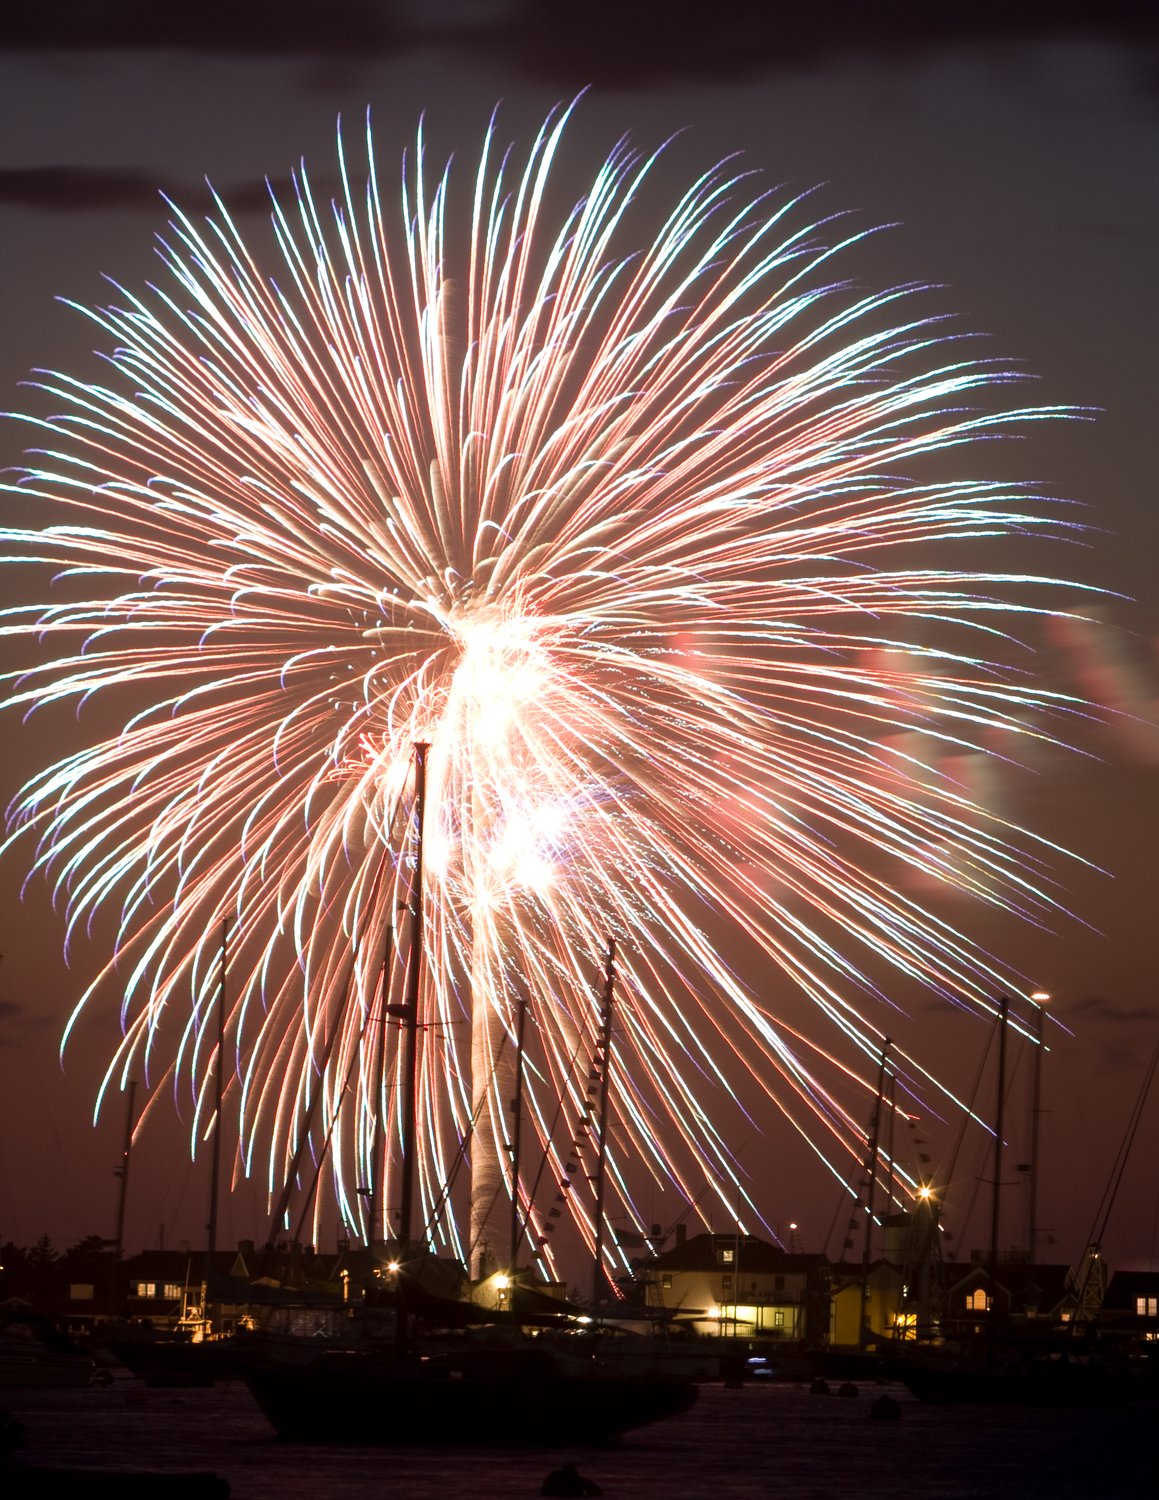 Fireworks explode over Nantucket Harbor on the Fourth of July.